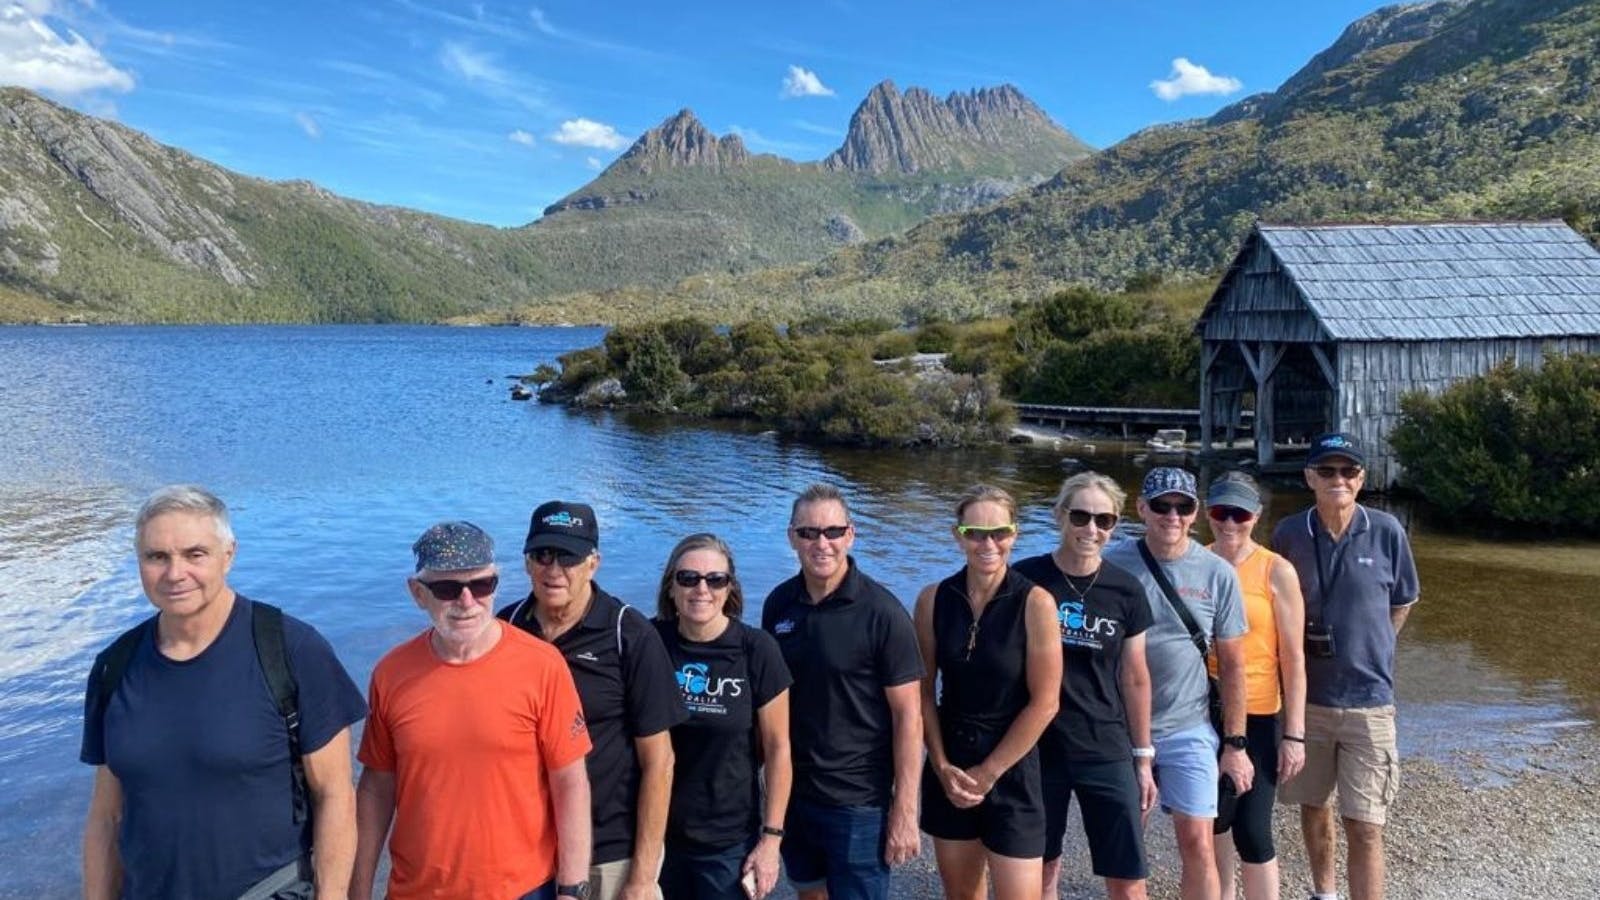 Group photo at Dove Lake, Cradle Mountain after checking into Peppers and taking the shuttle bus up.